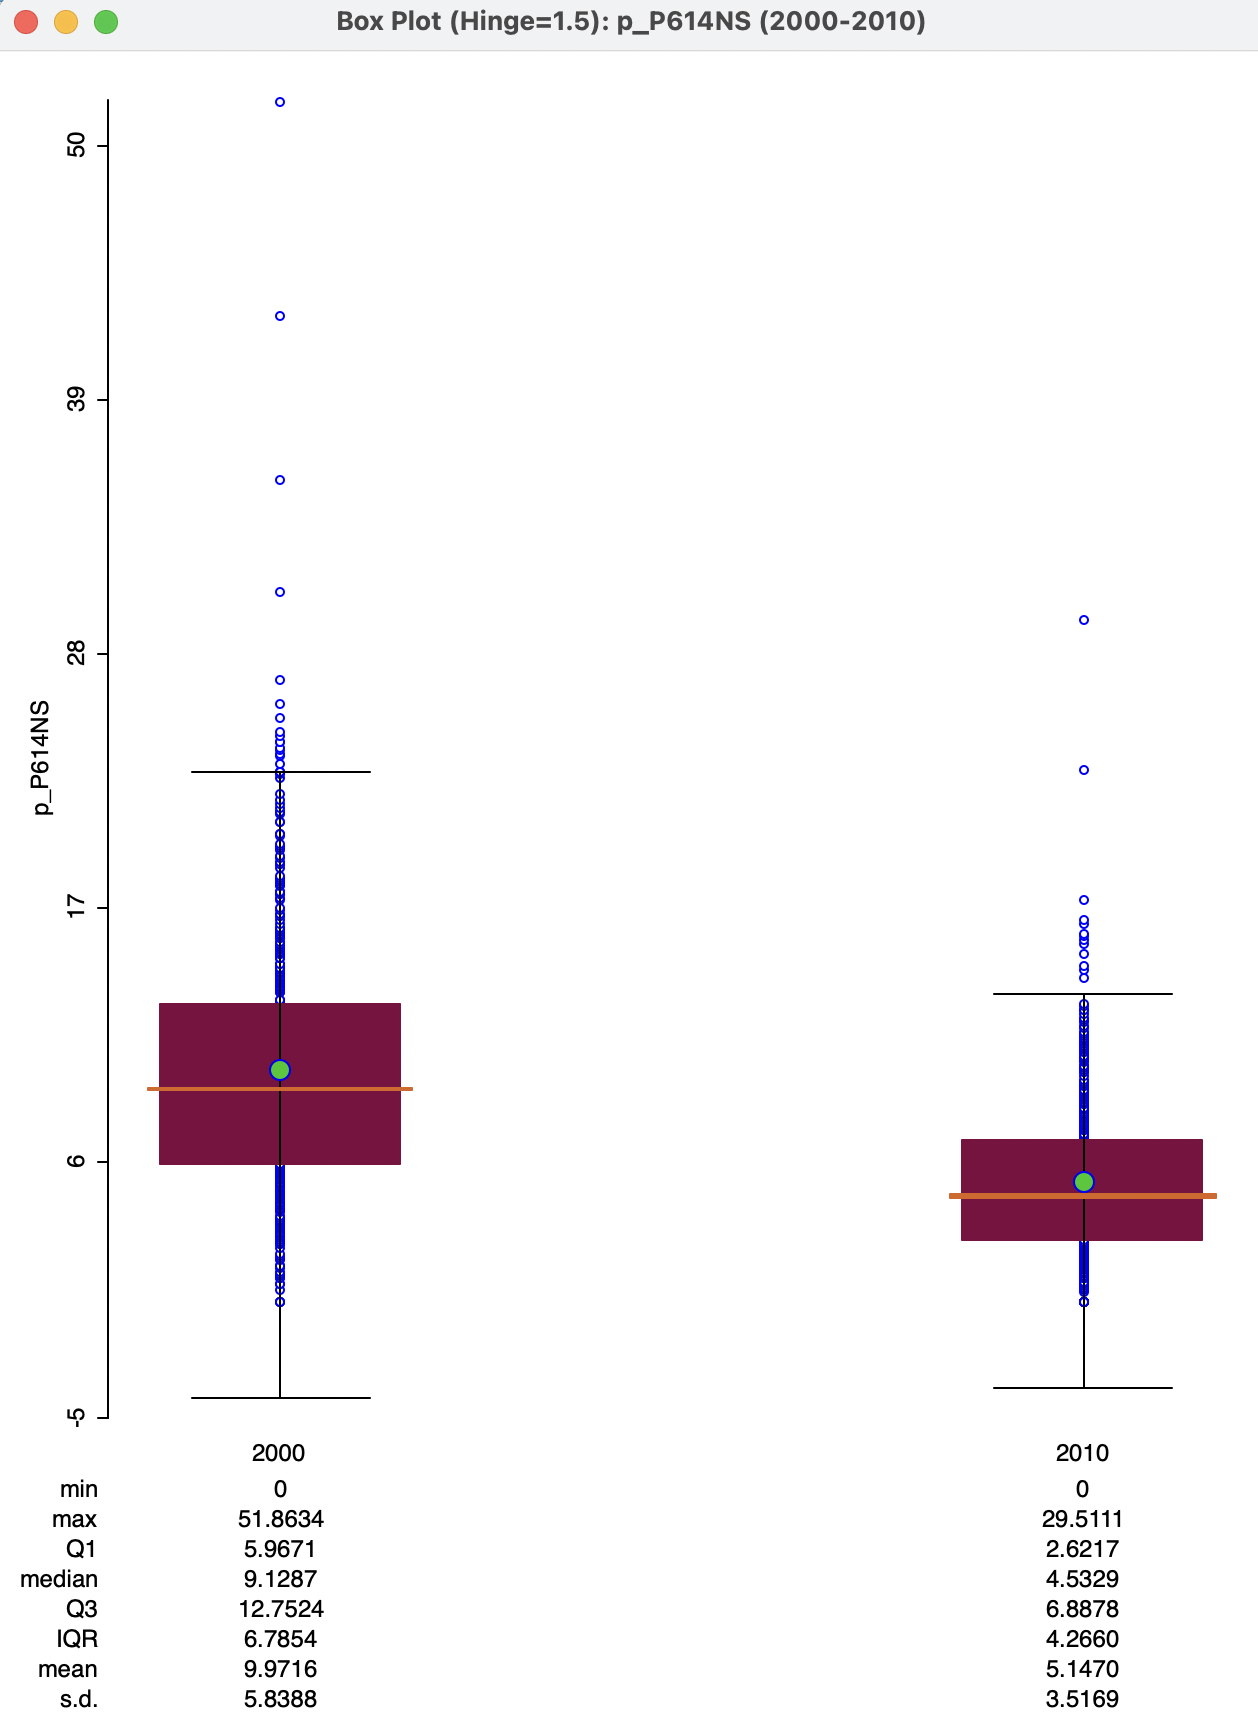 Box plot for two time periods